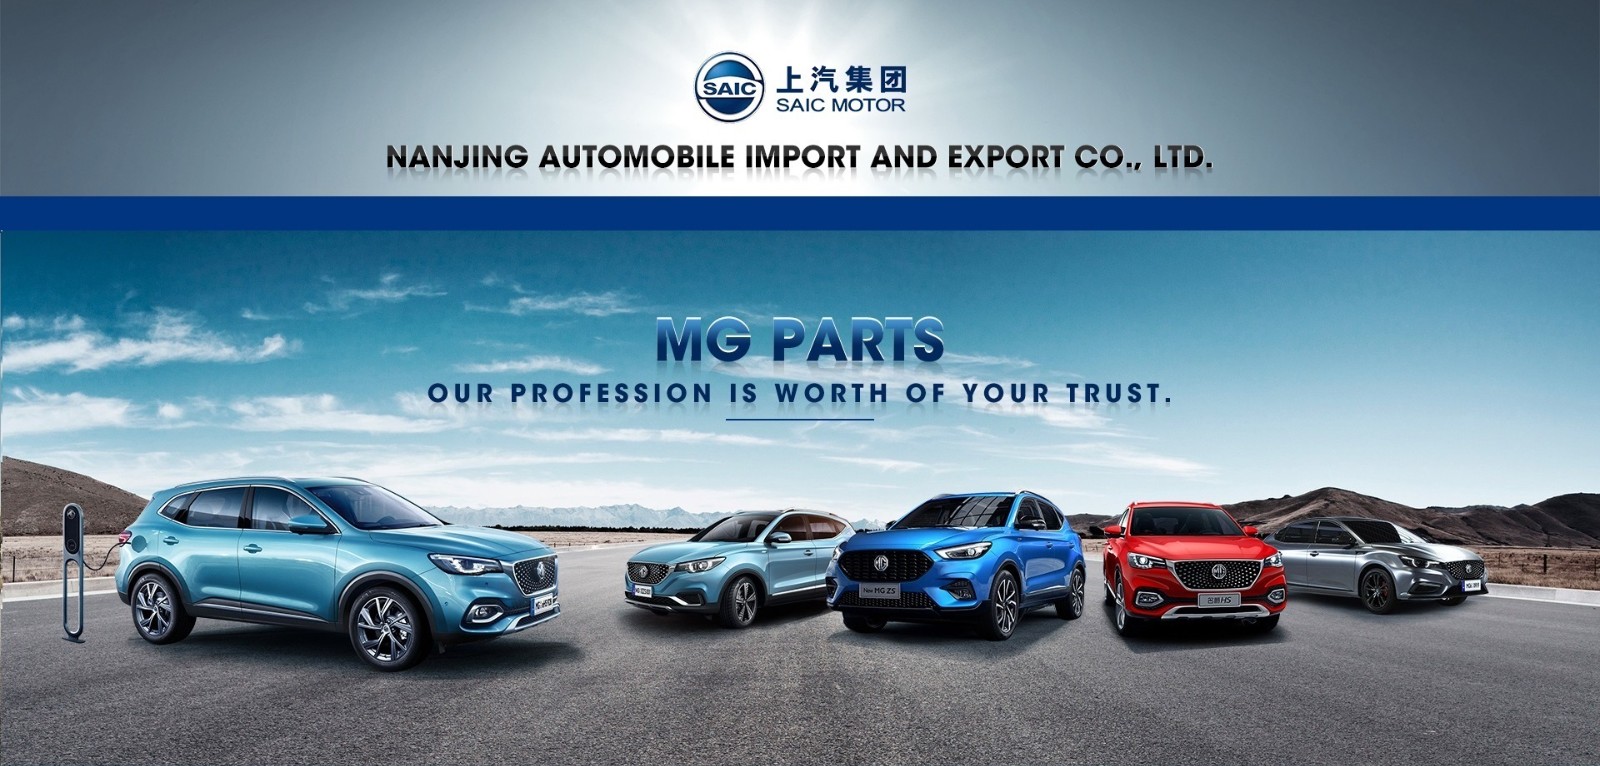 All spare parts of MG brand